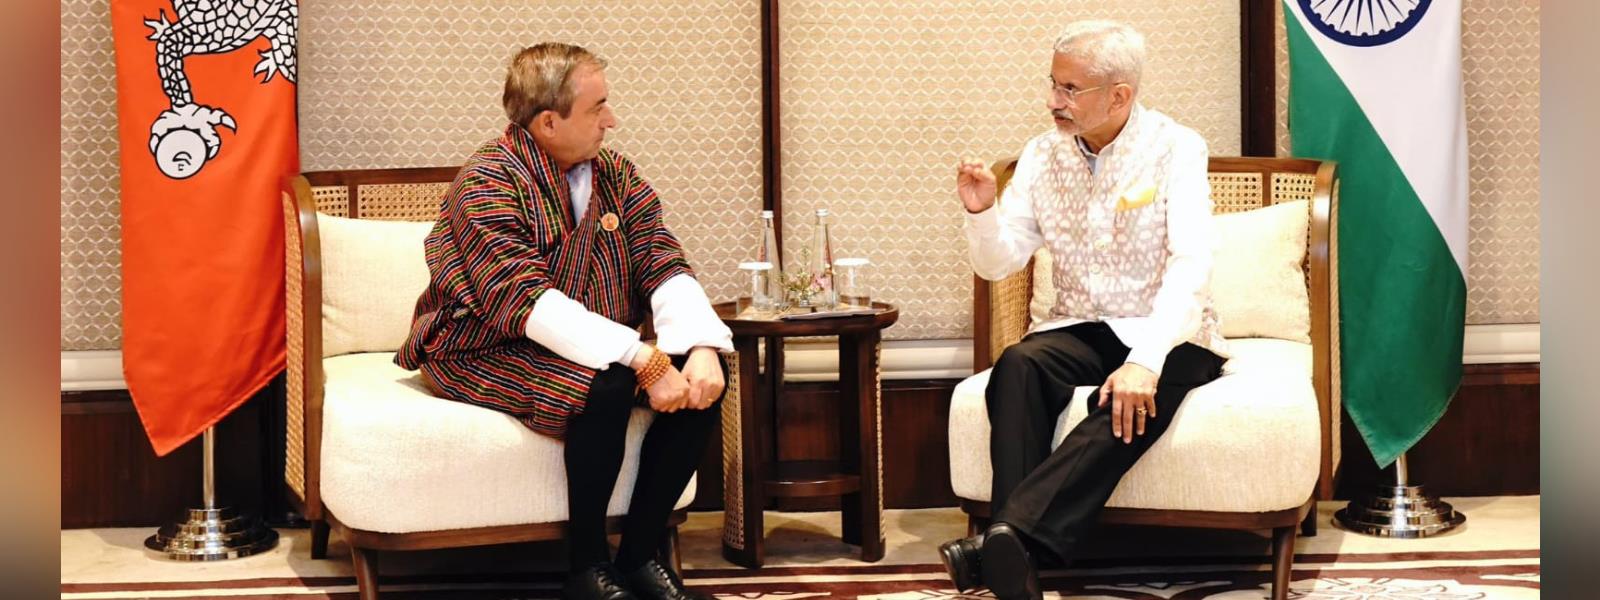 External Affairs Minister, Dr. S. Jaishankar met Foreign Minister of Bhutan, H.E. Lyonpo D. N. Dhungyel on the sidelines of BIMSTEC Foreign Ministers’ Retreat in New Delhi